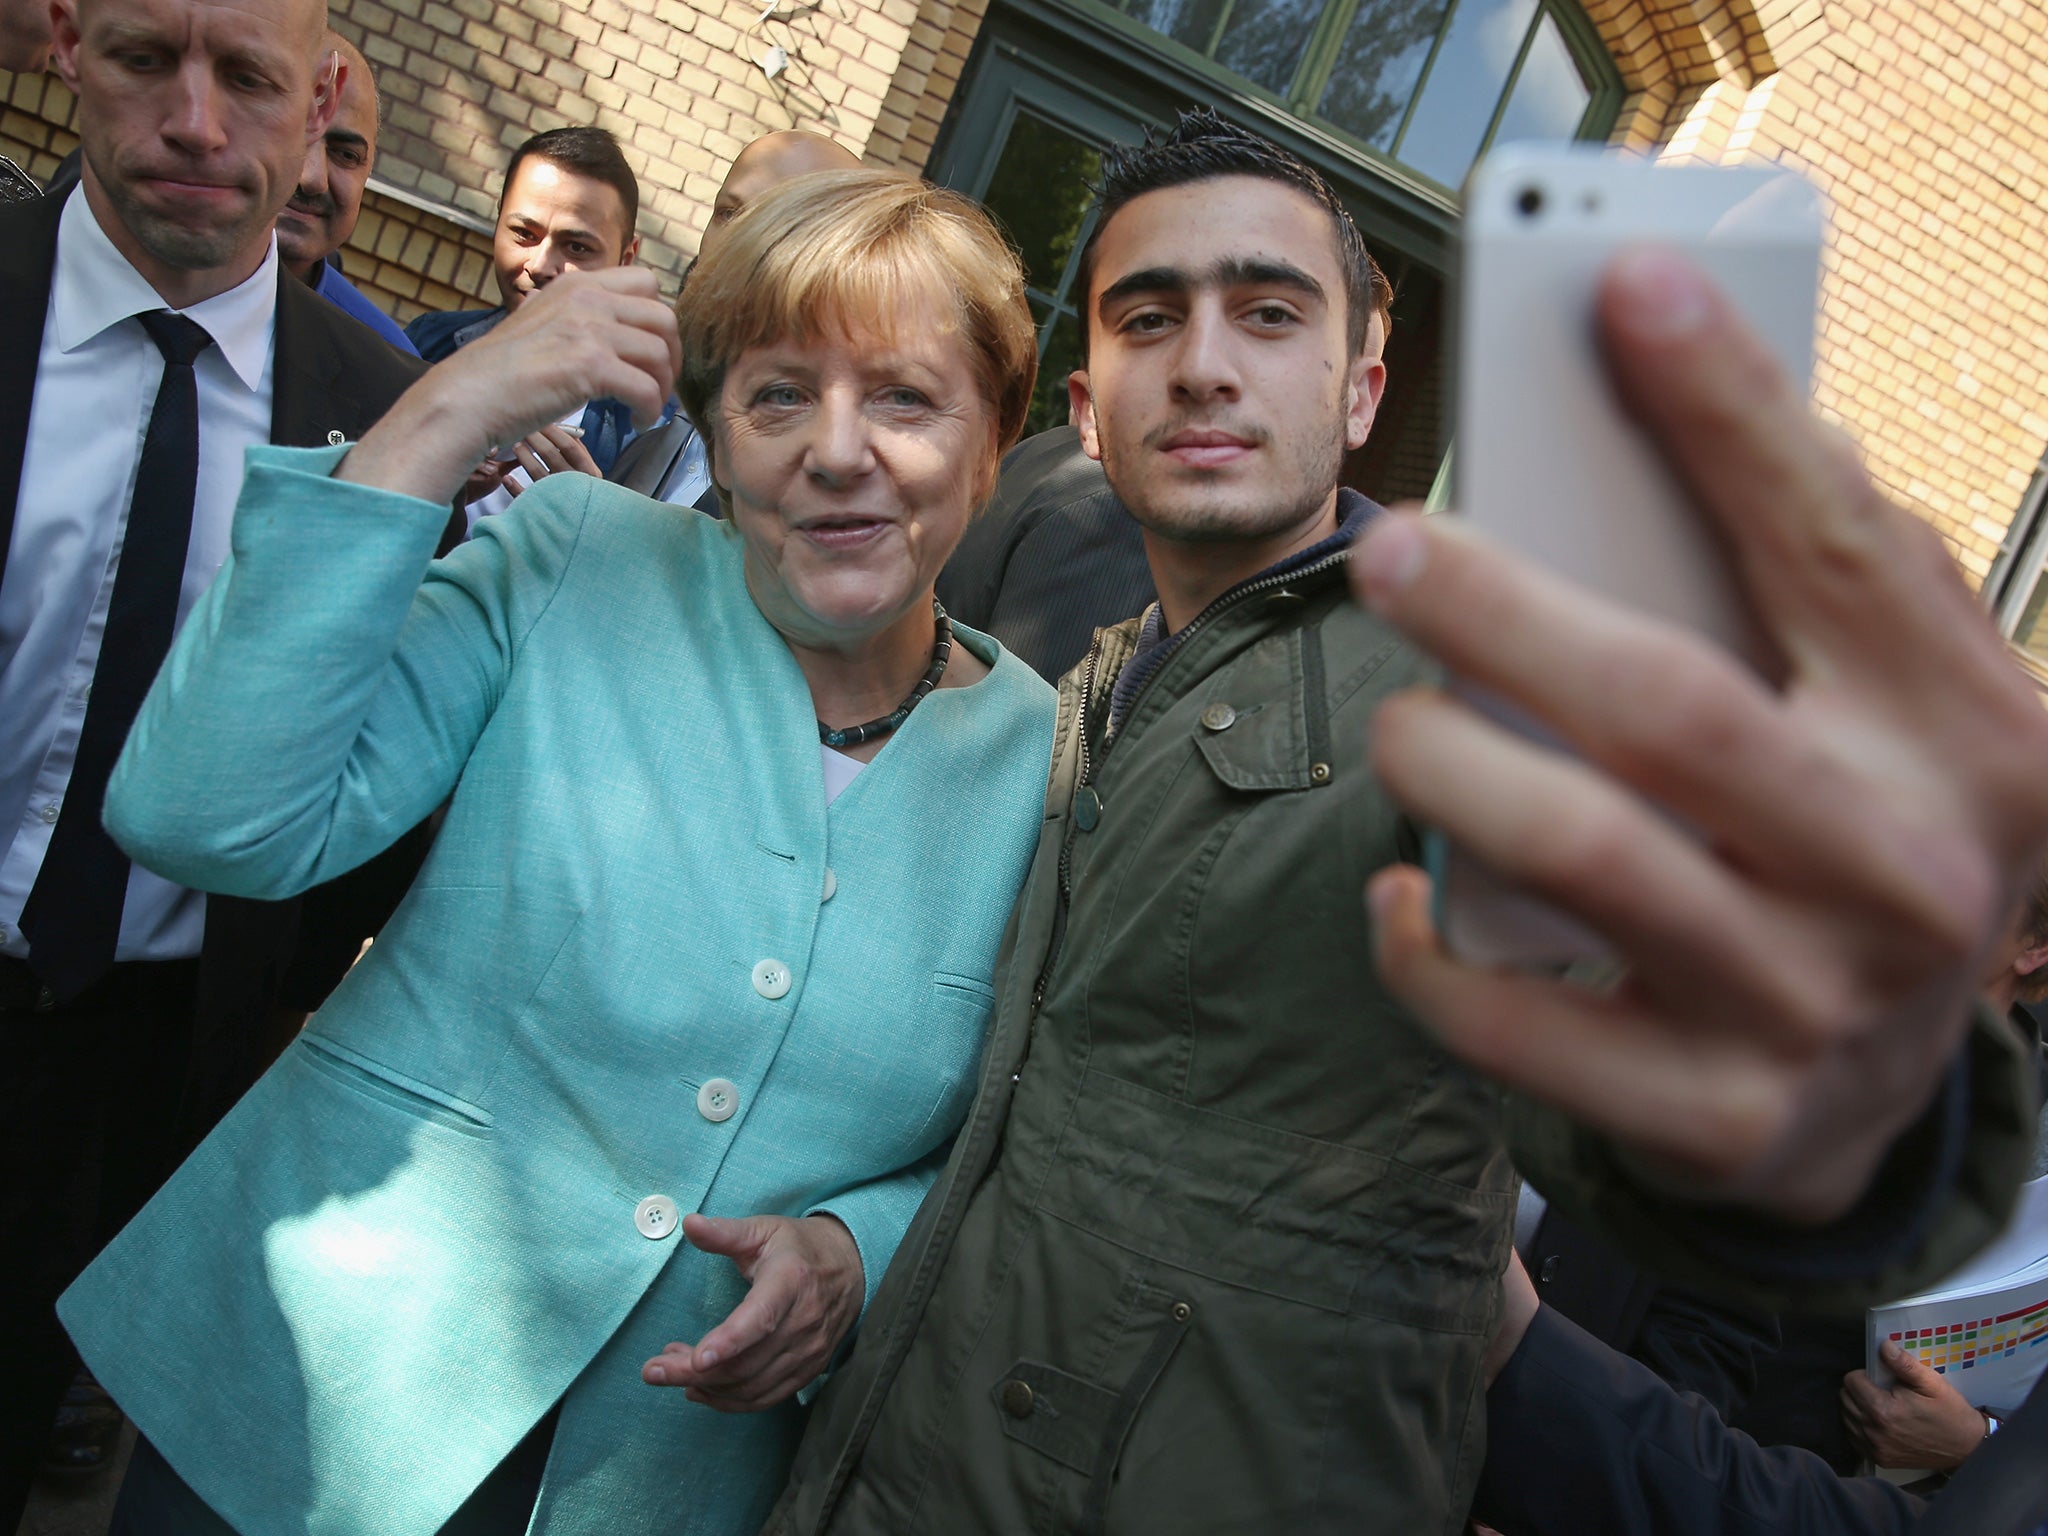 Angela Merkel denies that this ‘selfie’ with a migrant, taken at a shelter outside Berlin, has been encouraging ‘hundreds of thousands of people to leave their homes and embark on this difficult road’